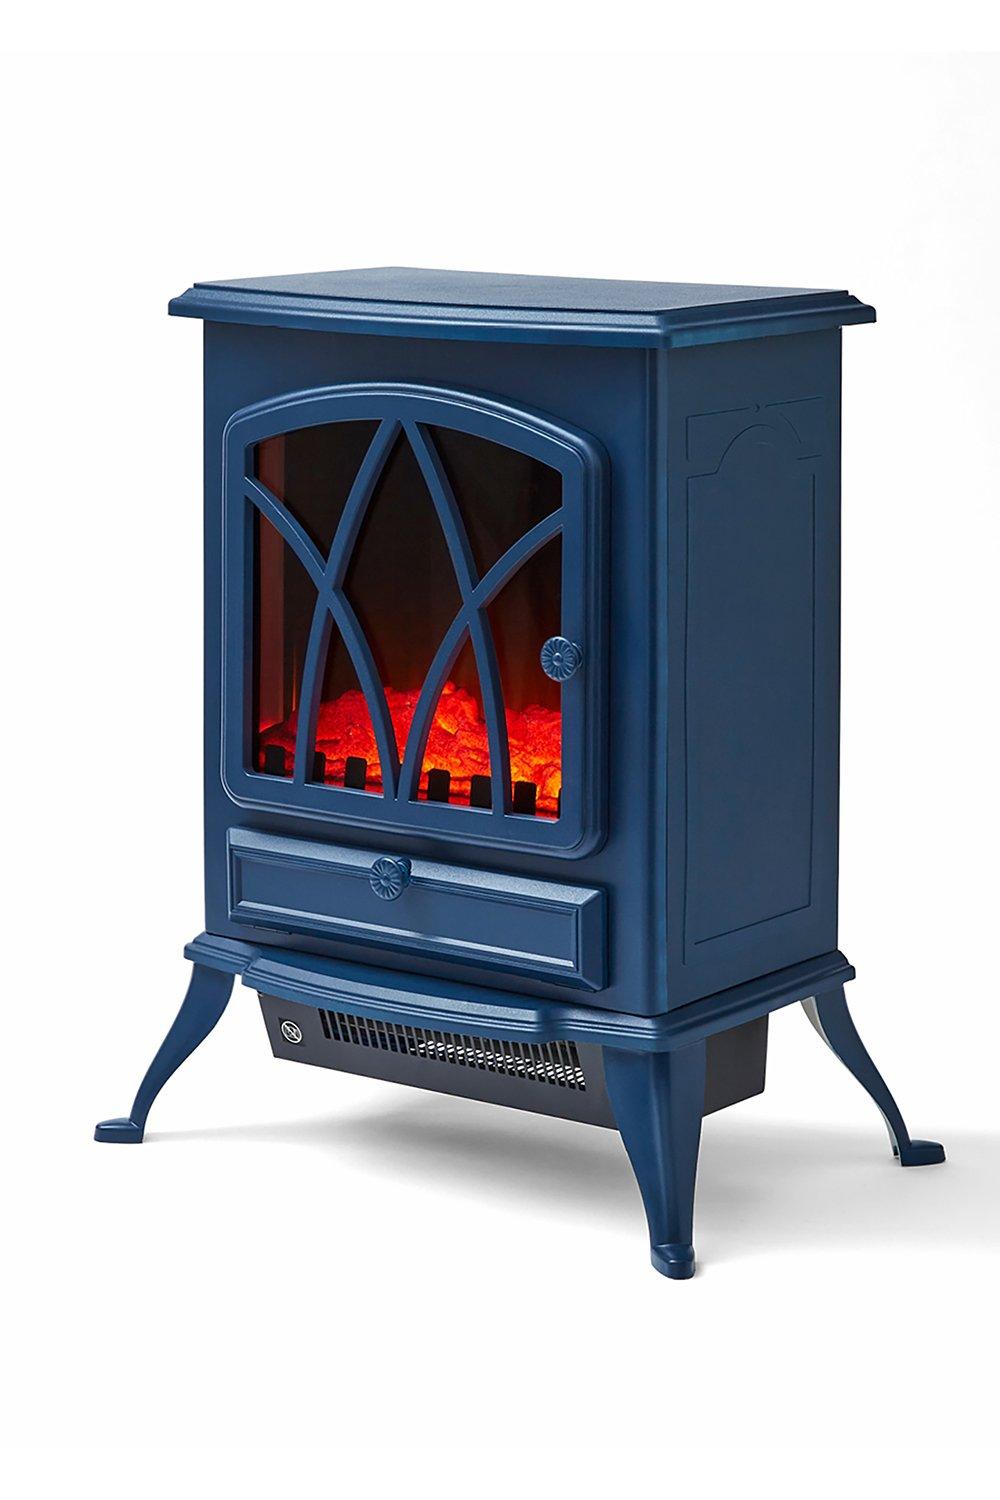 Stirling 2KW Stove Fire